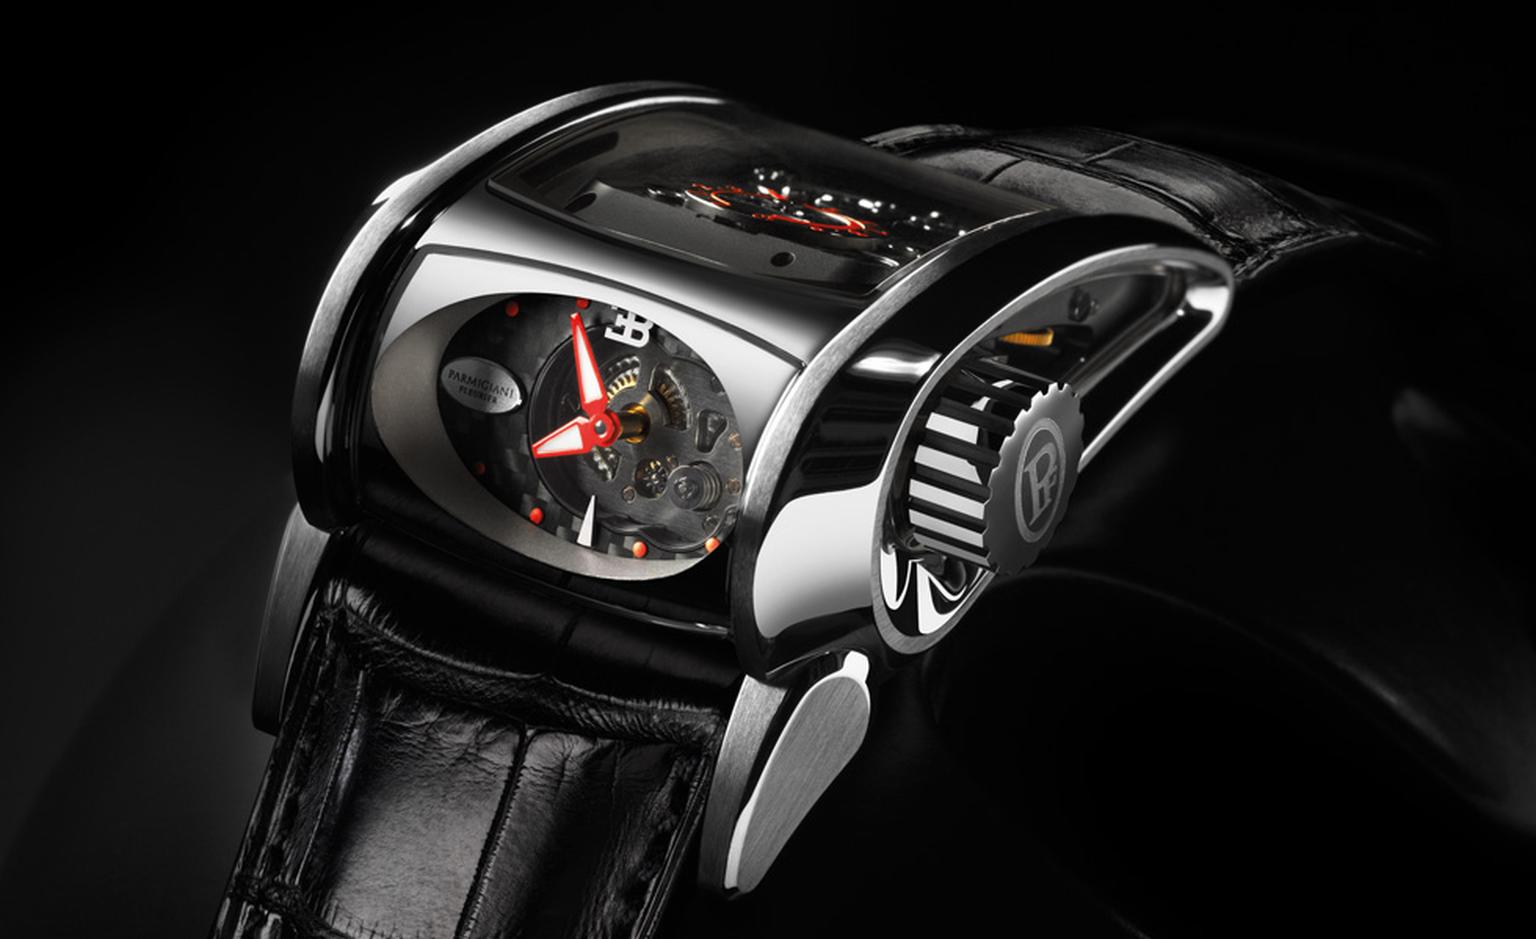 Time is read off the side of the case on the Parmigiani Fleurier Bugatti Super Sport, so no need to take your hands off the wheel to glance at the time